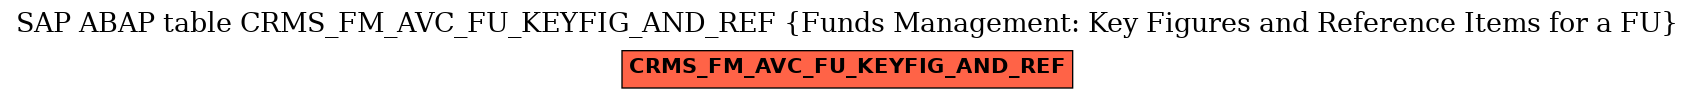 E-R Diagram for table CRMS_FM_AVC_FU_KEYFIG_AND_REF (Funds Management: Key Figures and Reference Items for a FU)